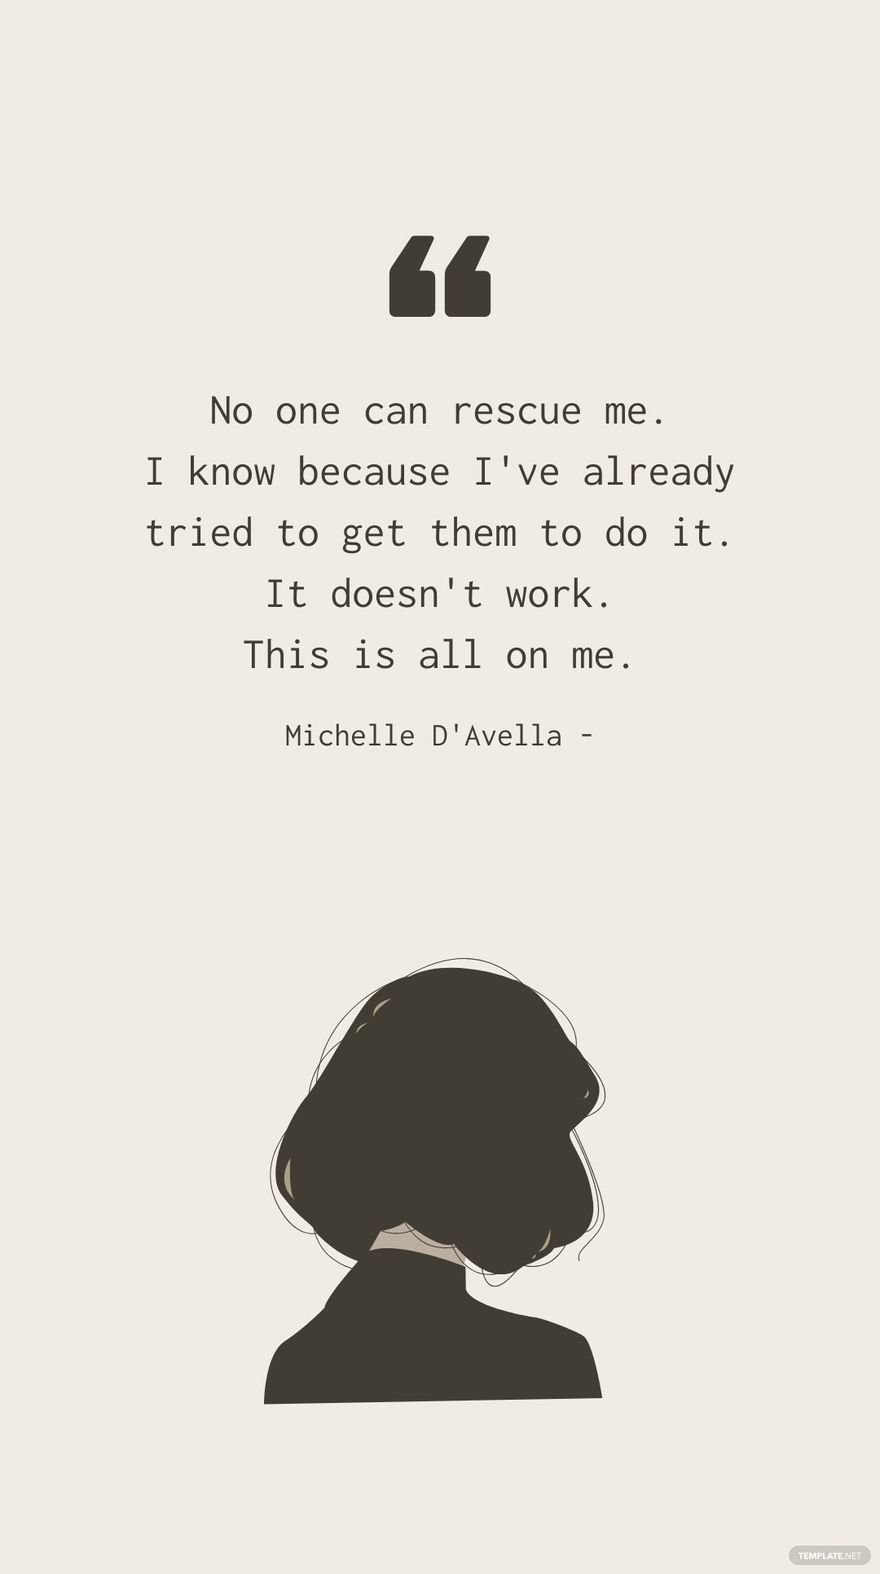 Michelle D'Avella - No one can rescue me. I know because I've already tried to get them to do it. It doesn't work. This is all on me. in JPG